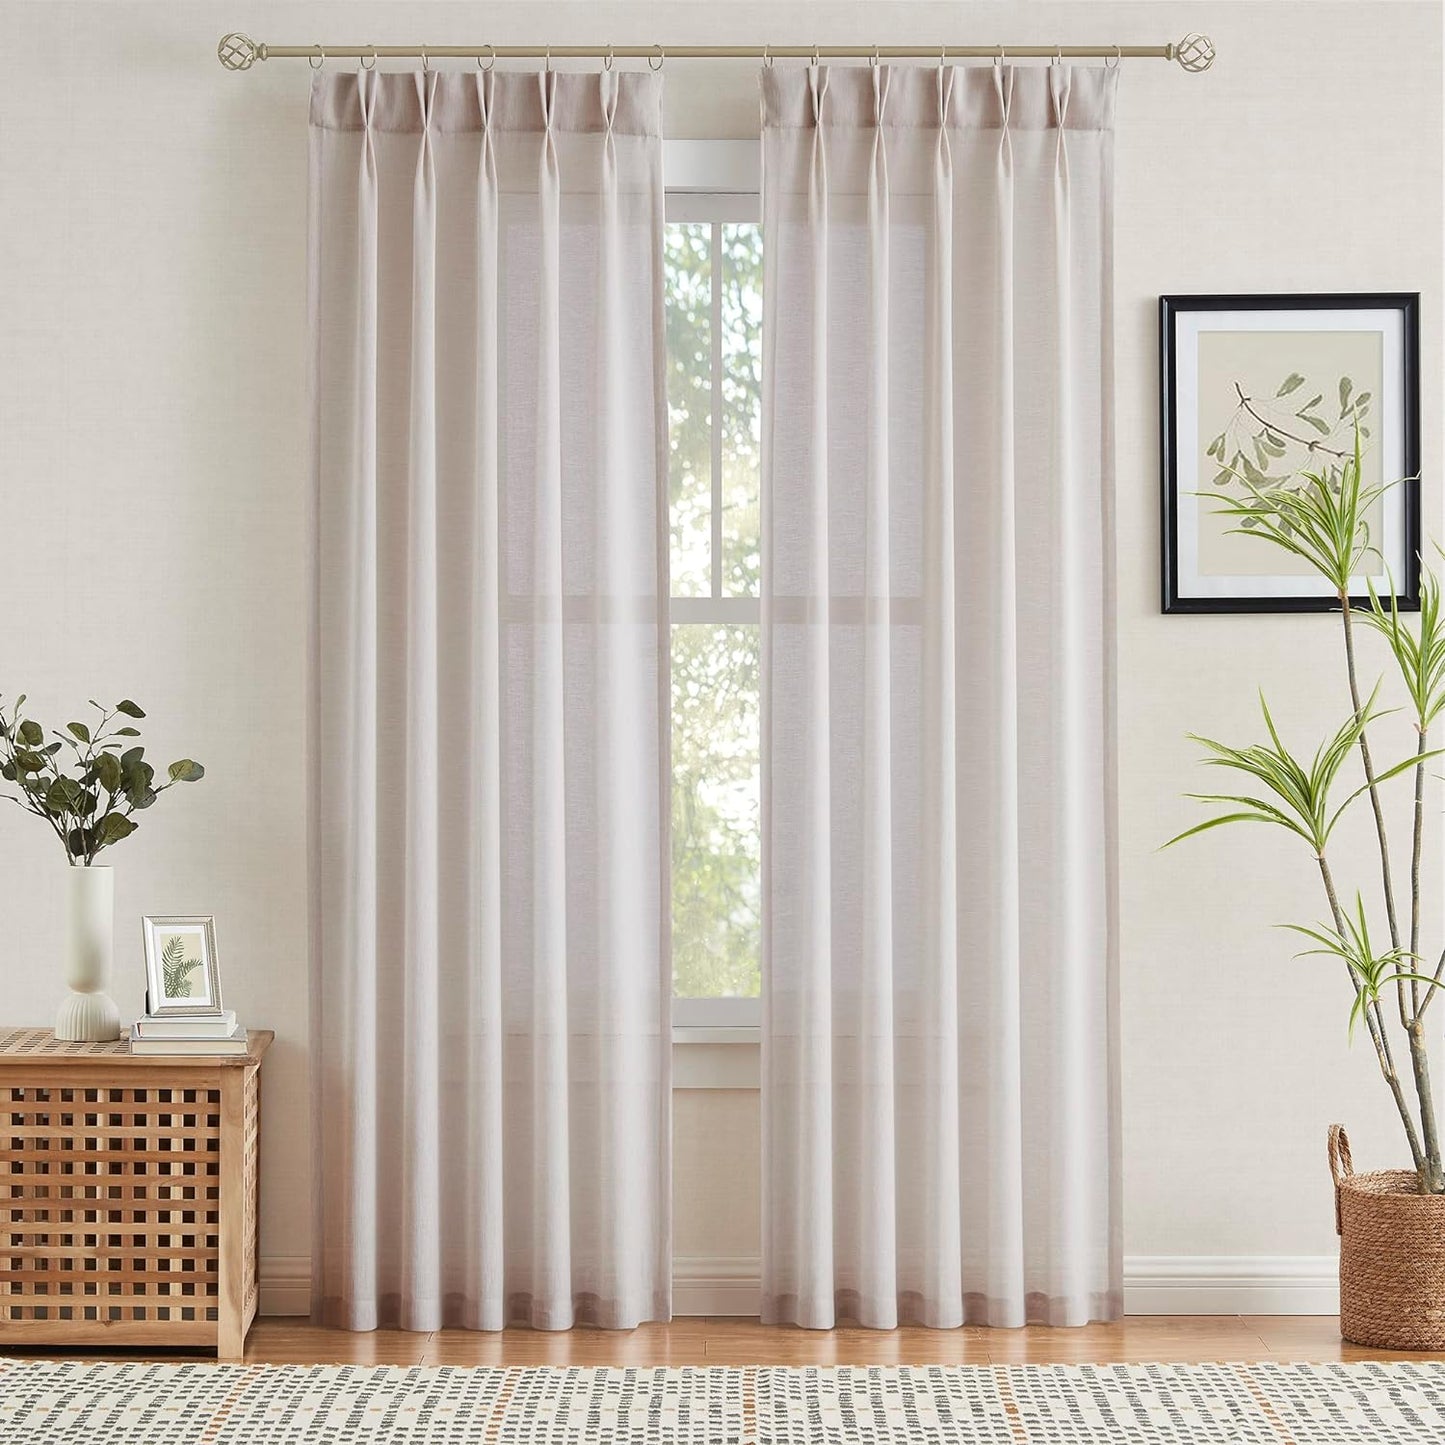 Enactex Linen Textured Pinch Pleat 25 X 84 Inch Semi Sheer Back Tab Curtains Light Filtering Drapes for Living Room Farmhouse Privacy Protect Window Treatments for Bedroom Patio Door 2 Panels, Tan  Enactex Natural 25"X84"X2 